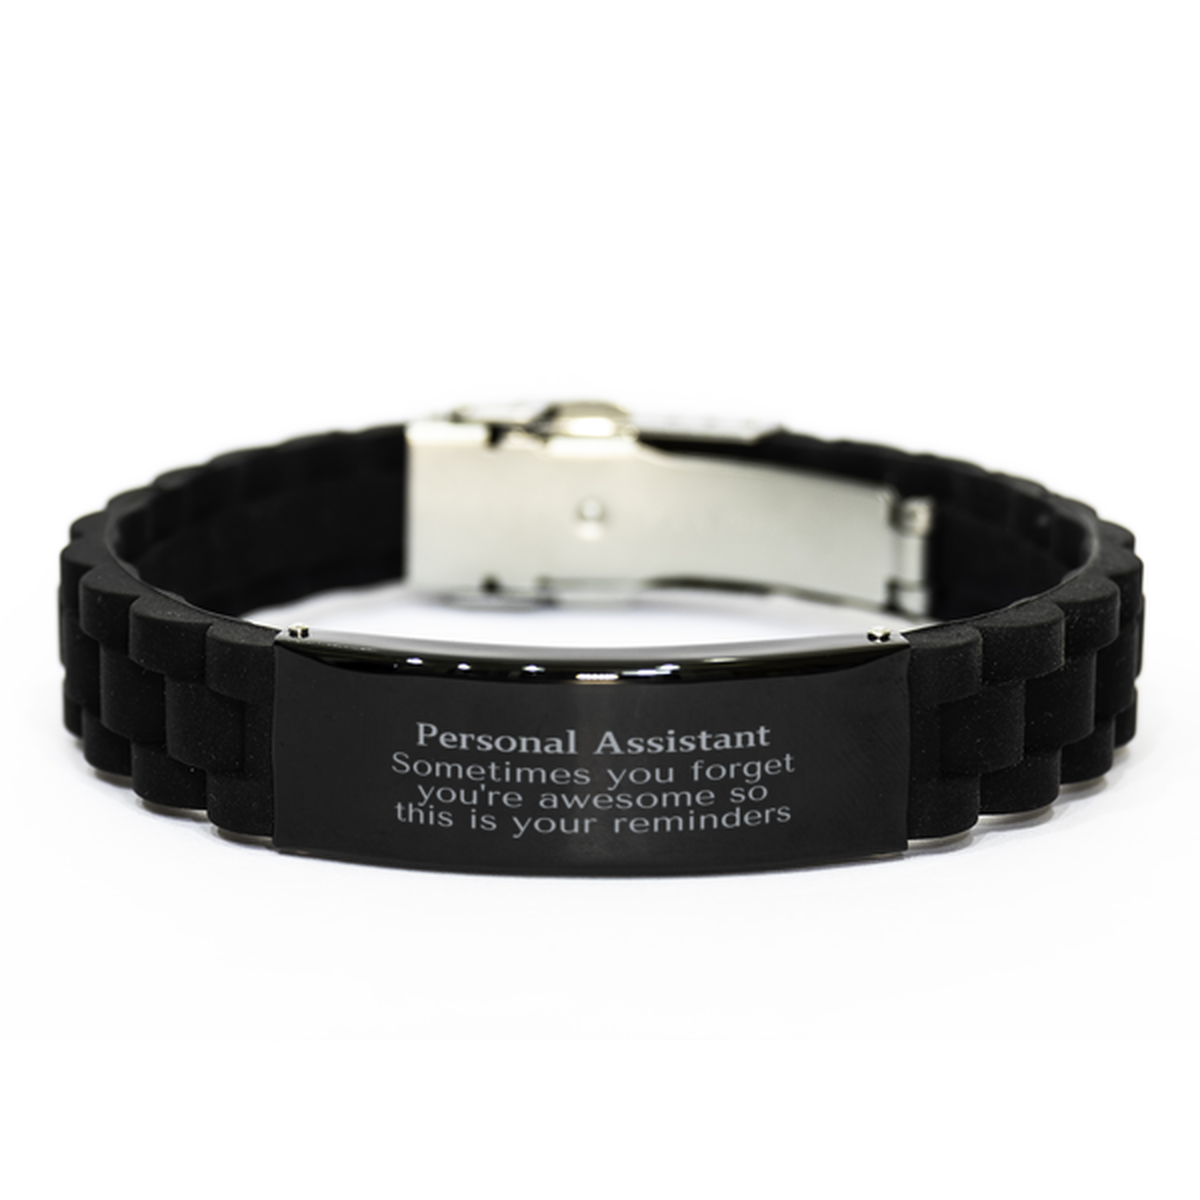 Sentimental Personal Assistant Black Glidelock Clasp Bracelet, Personal Assistant Sometimes you forget you're awesome so this is your reminders, Graduation Christmas Birthday Gifts for Personal Assistant, Men, Women, Coworkers